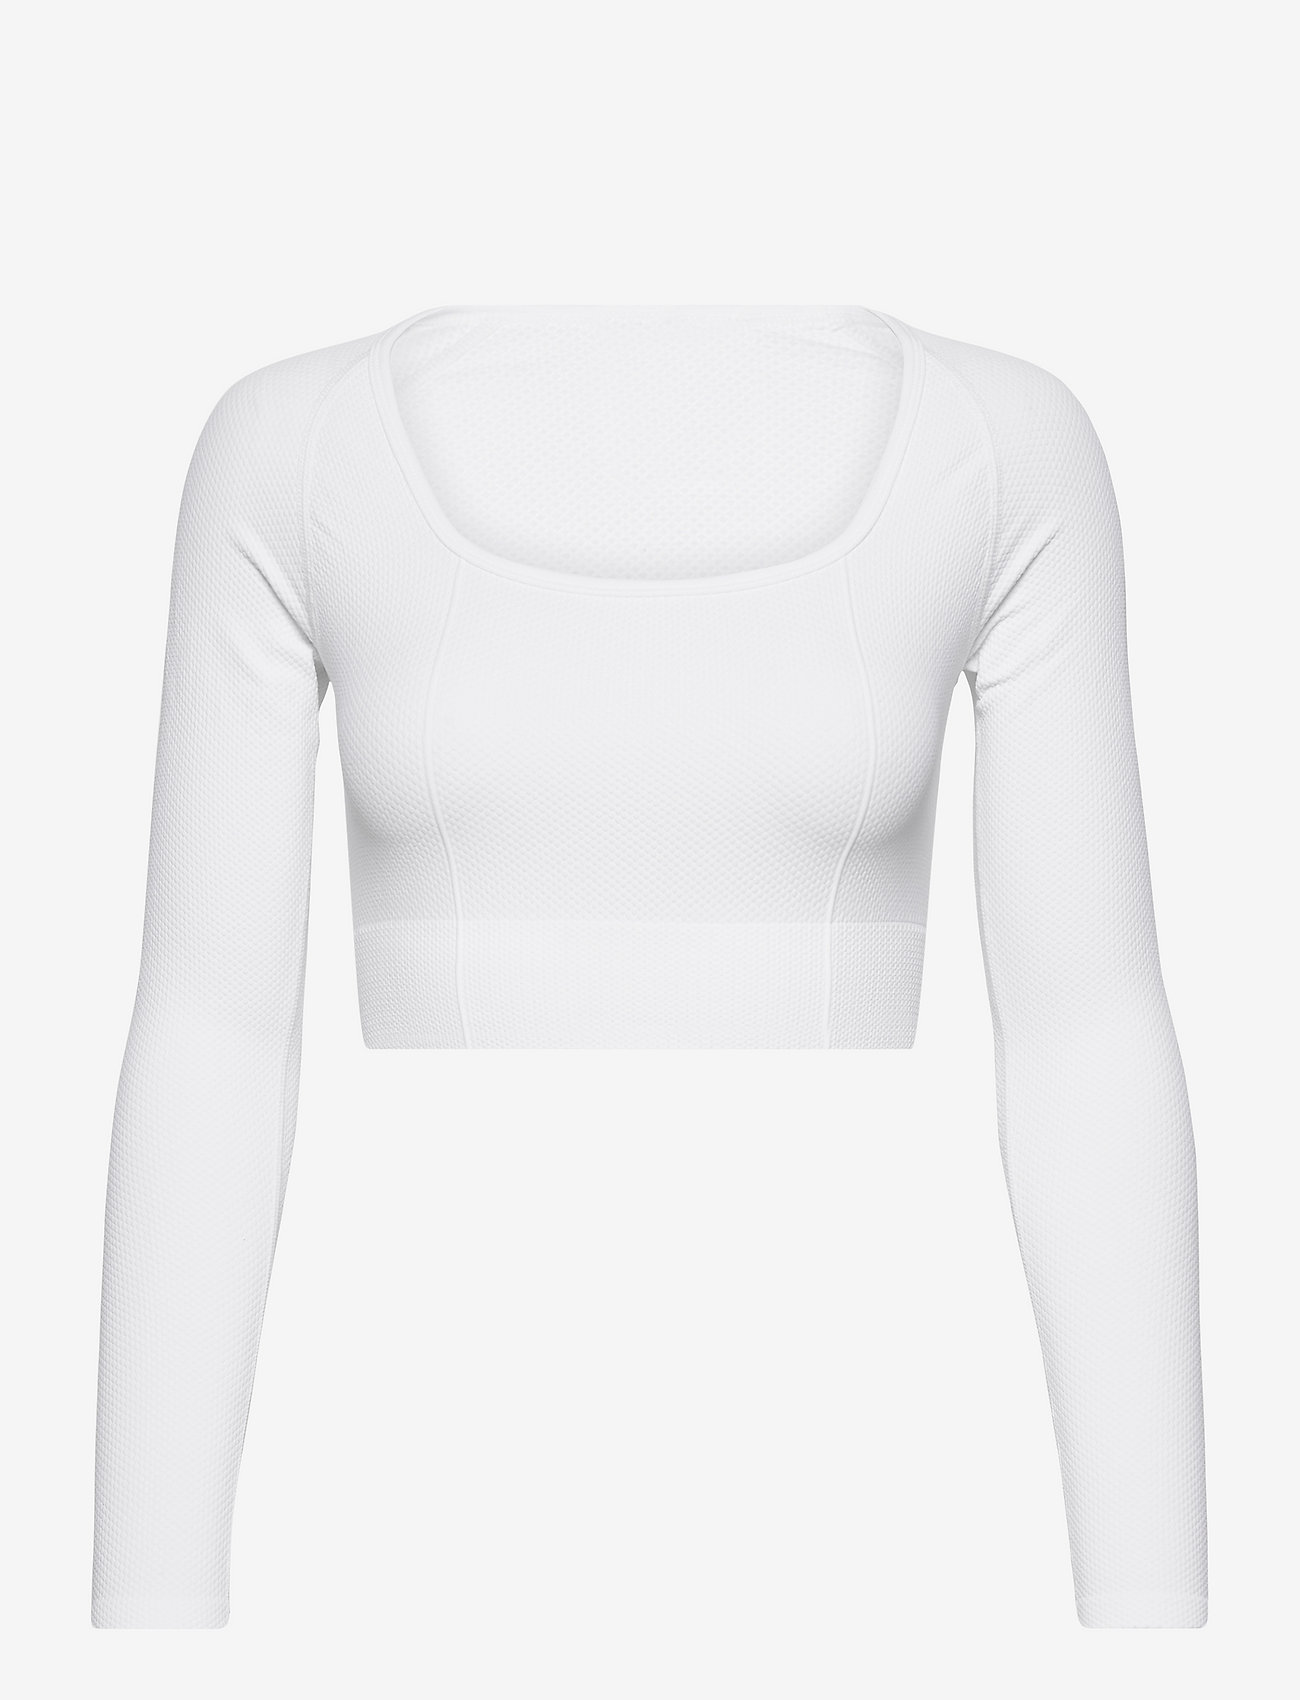 AIM'N - LUXE SEAMLESS CROPPED LONG SLEEVE - pitkähihaiset topit - white - 0